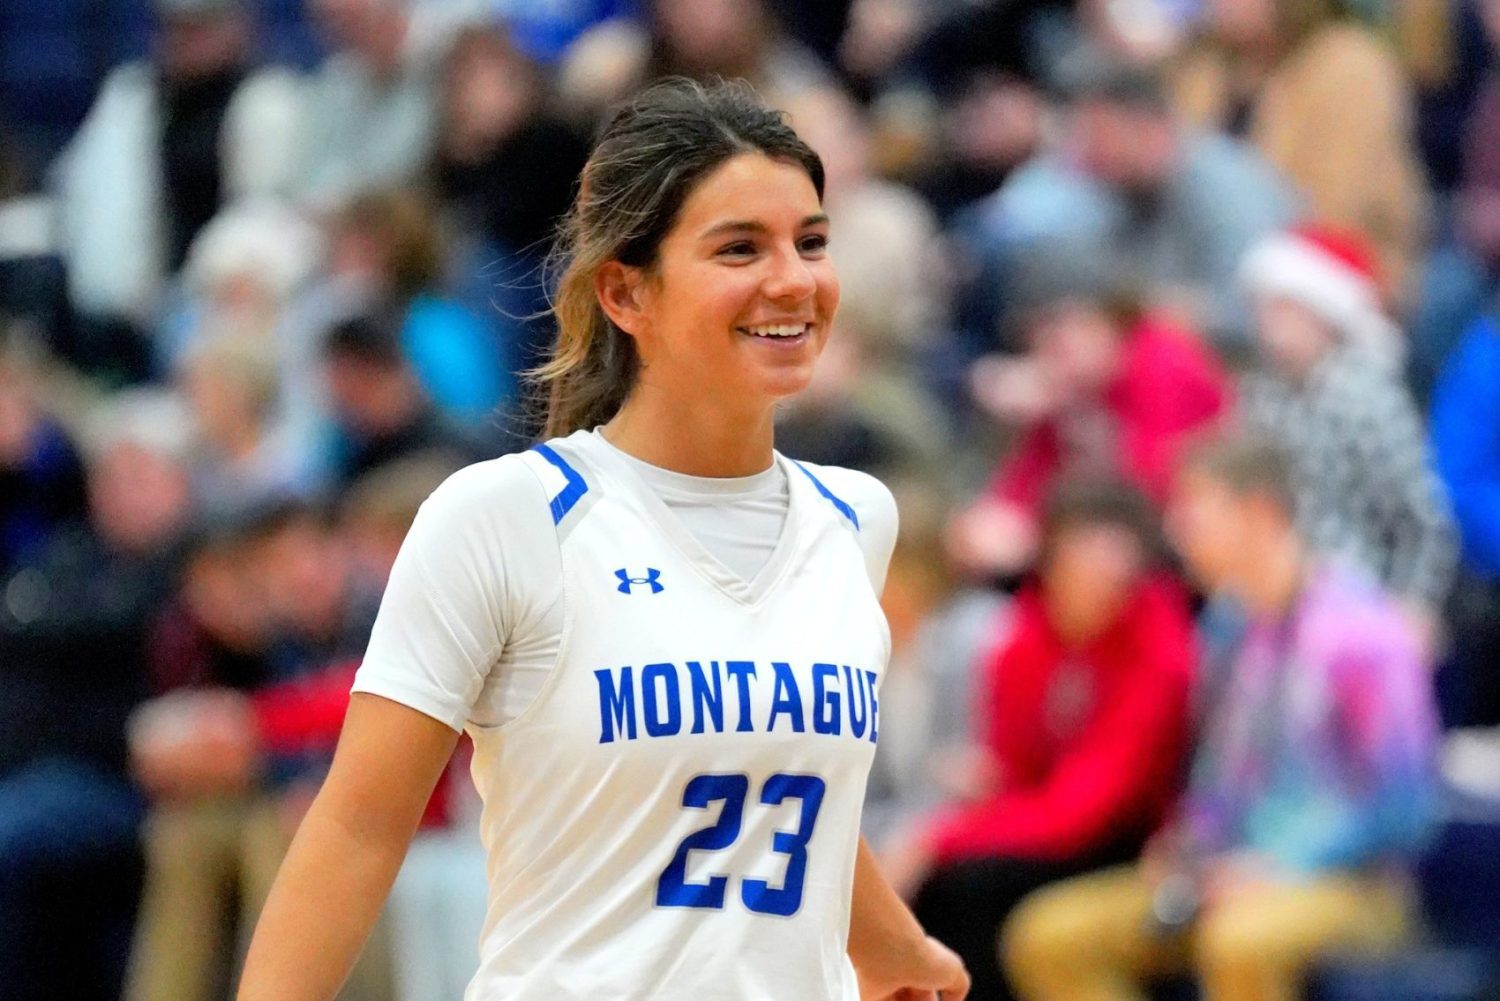 Montague girls post big victory over rival Whitehall